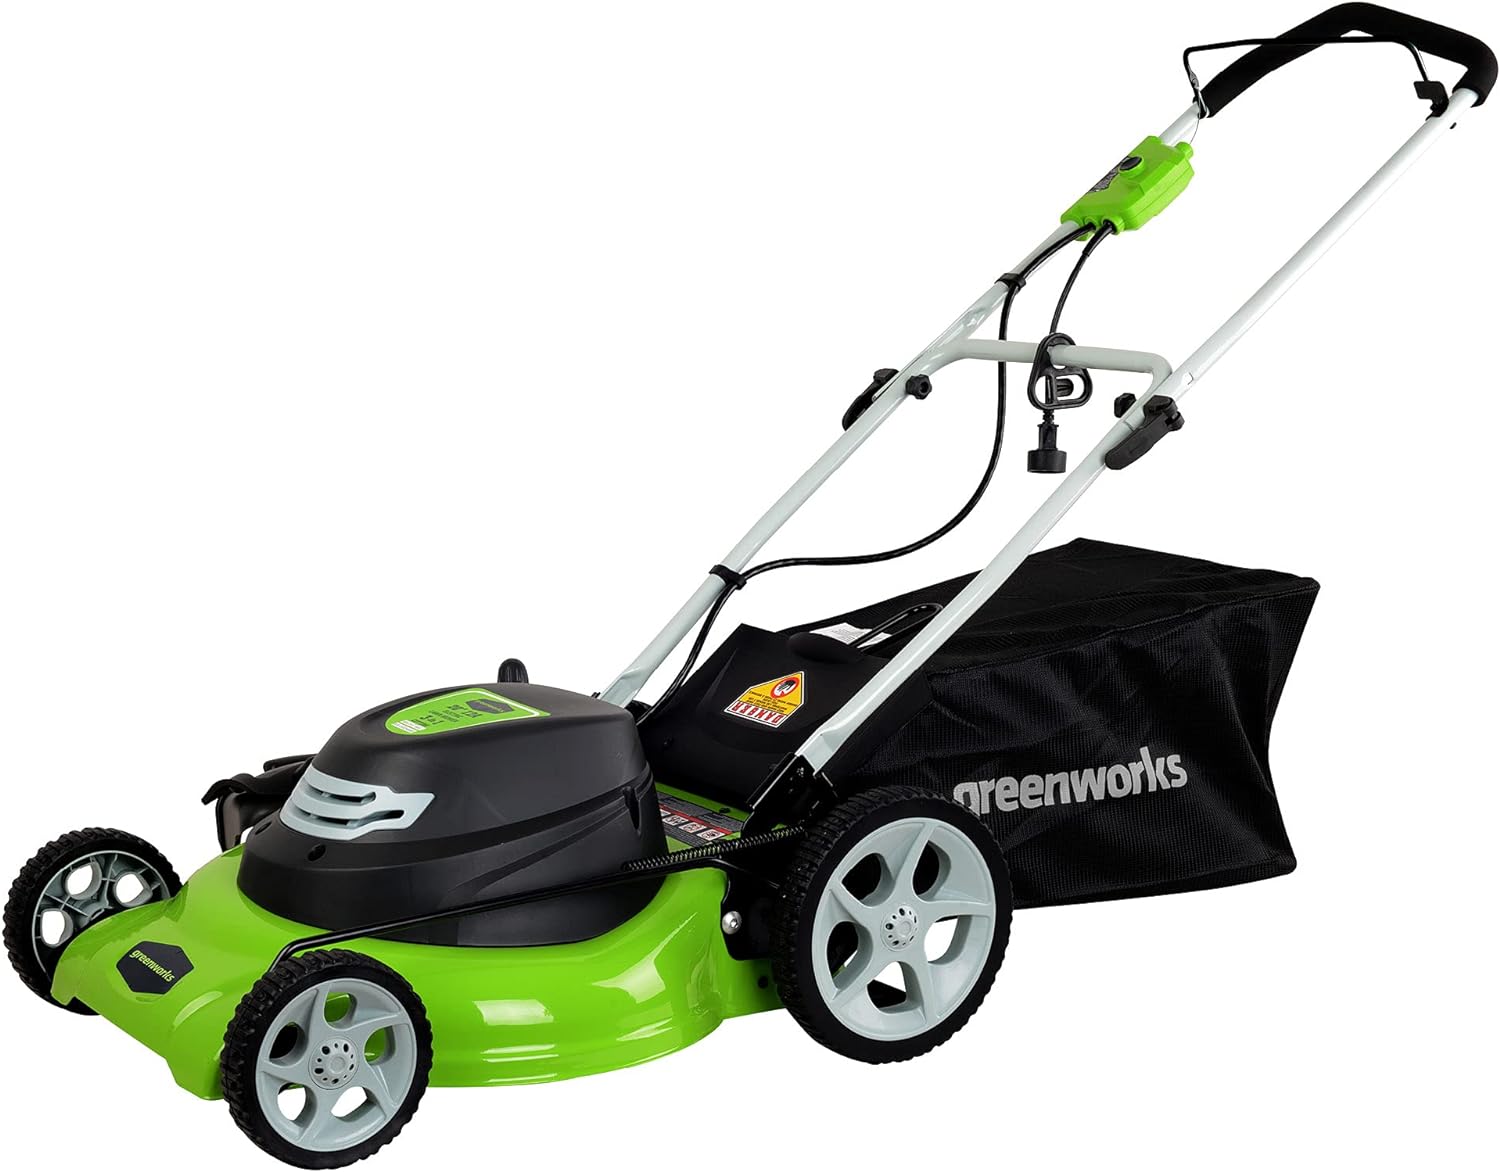 The pros and cons of electric lawn mowers - CNET